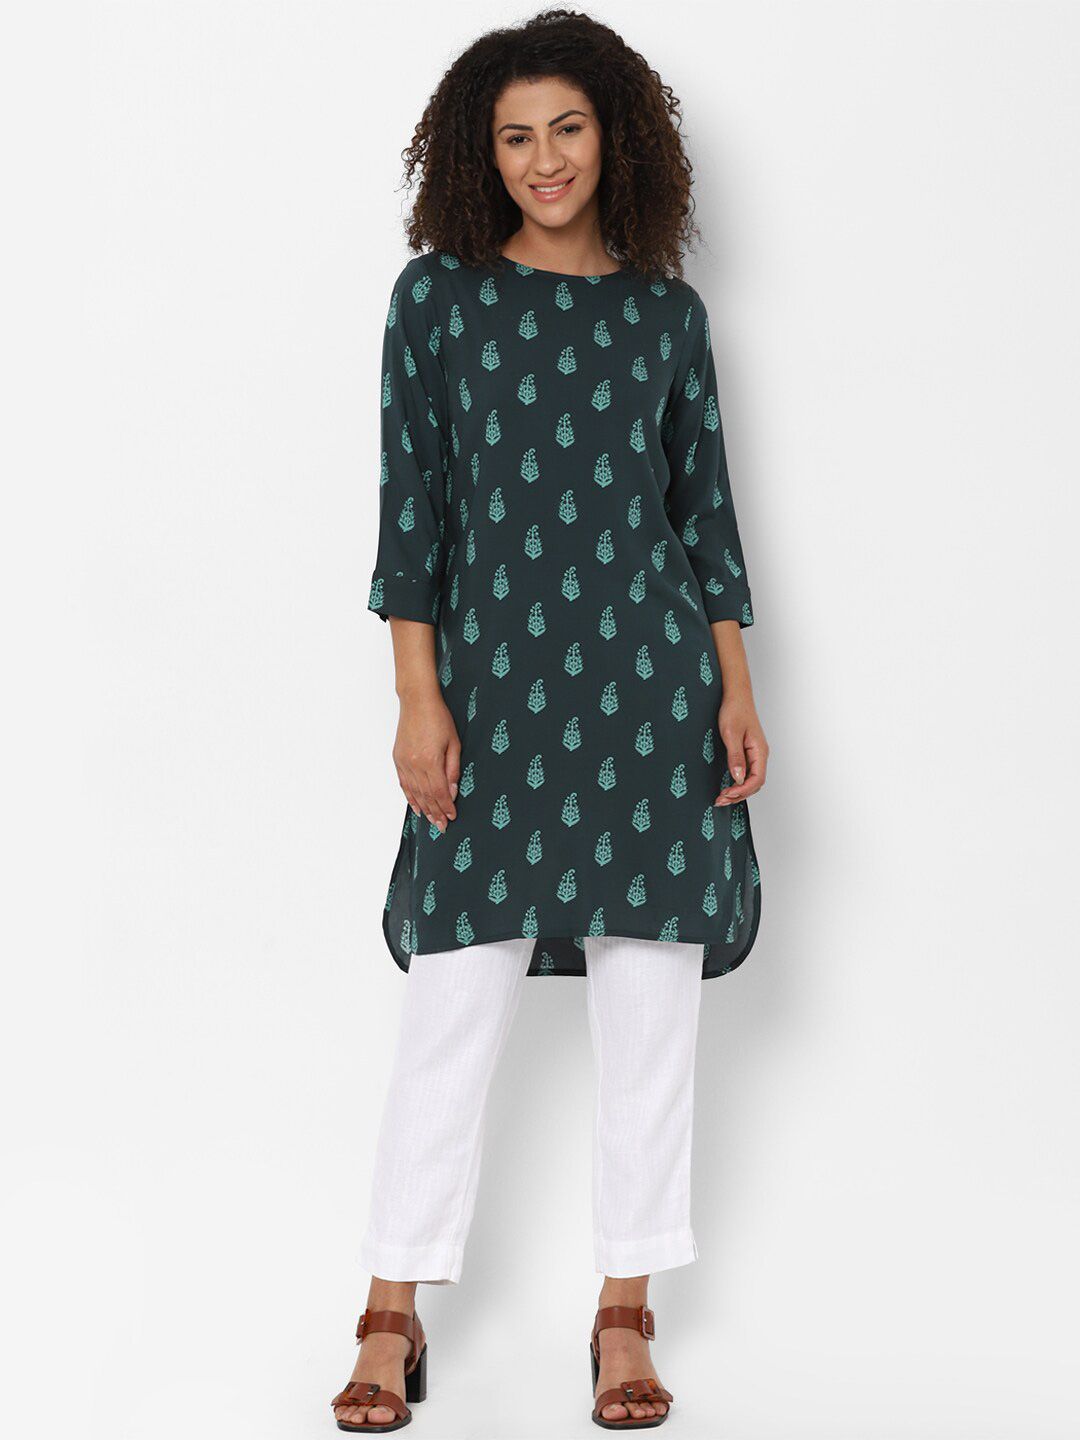 Allen Solly Woman Ethnic Motifs Print Green Tunic Price in India